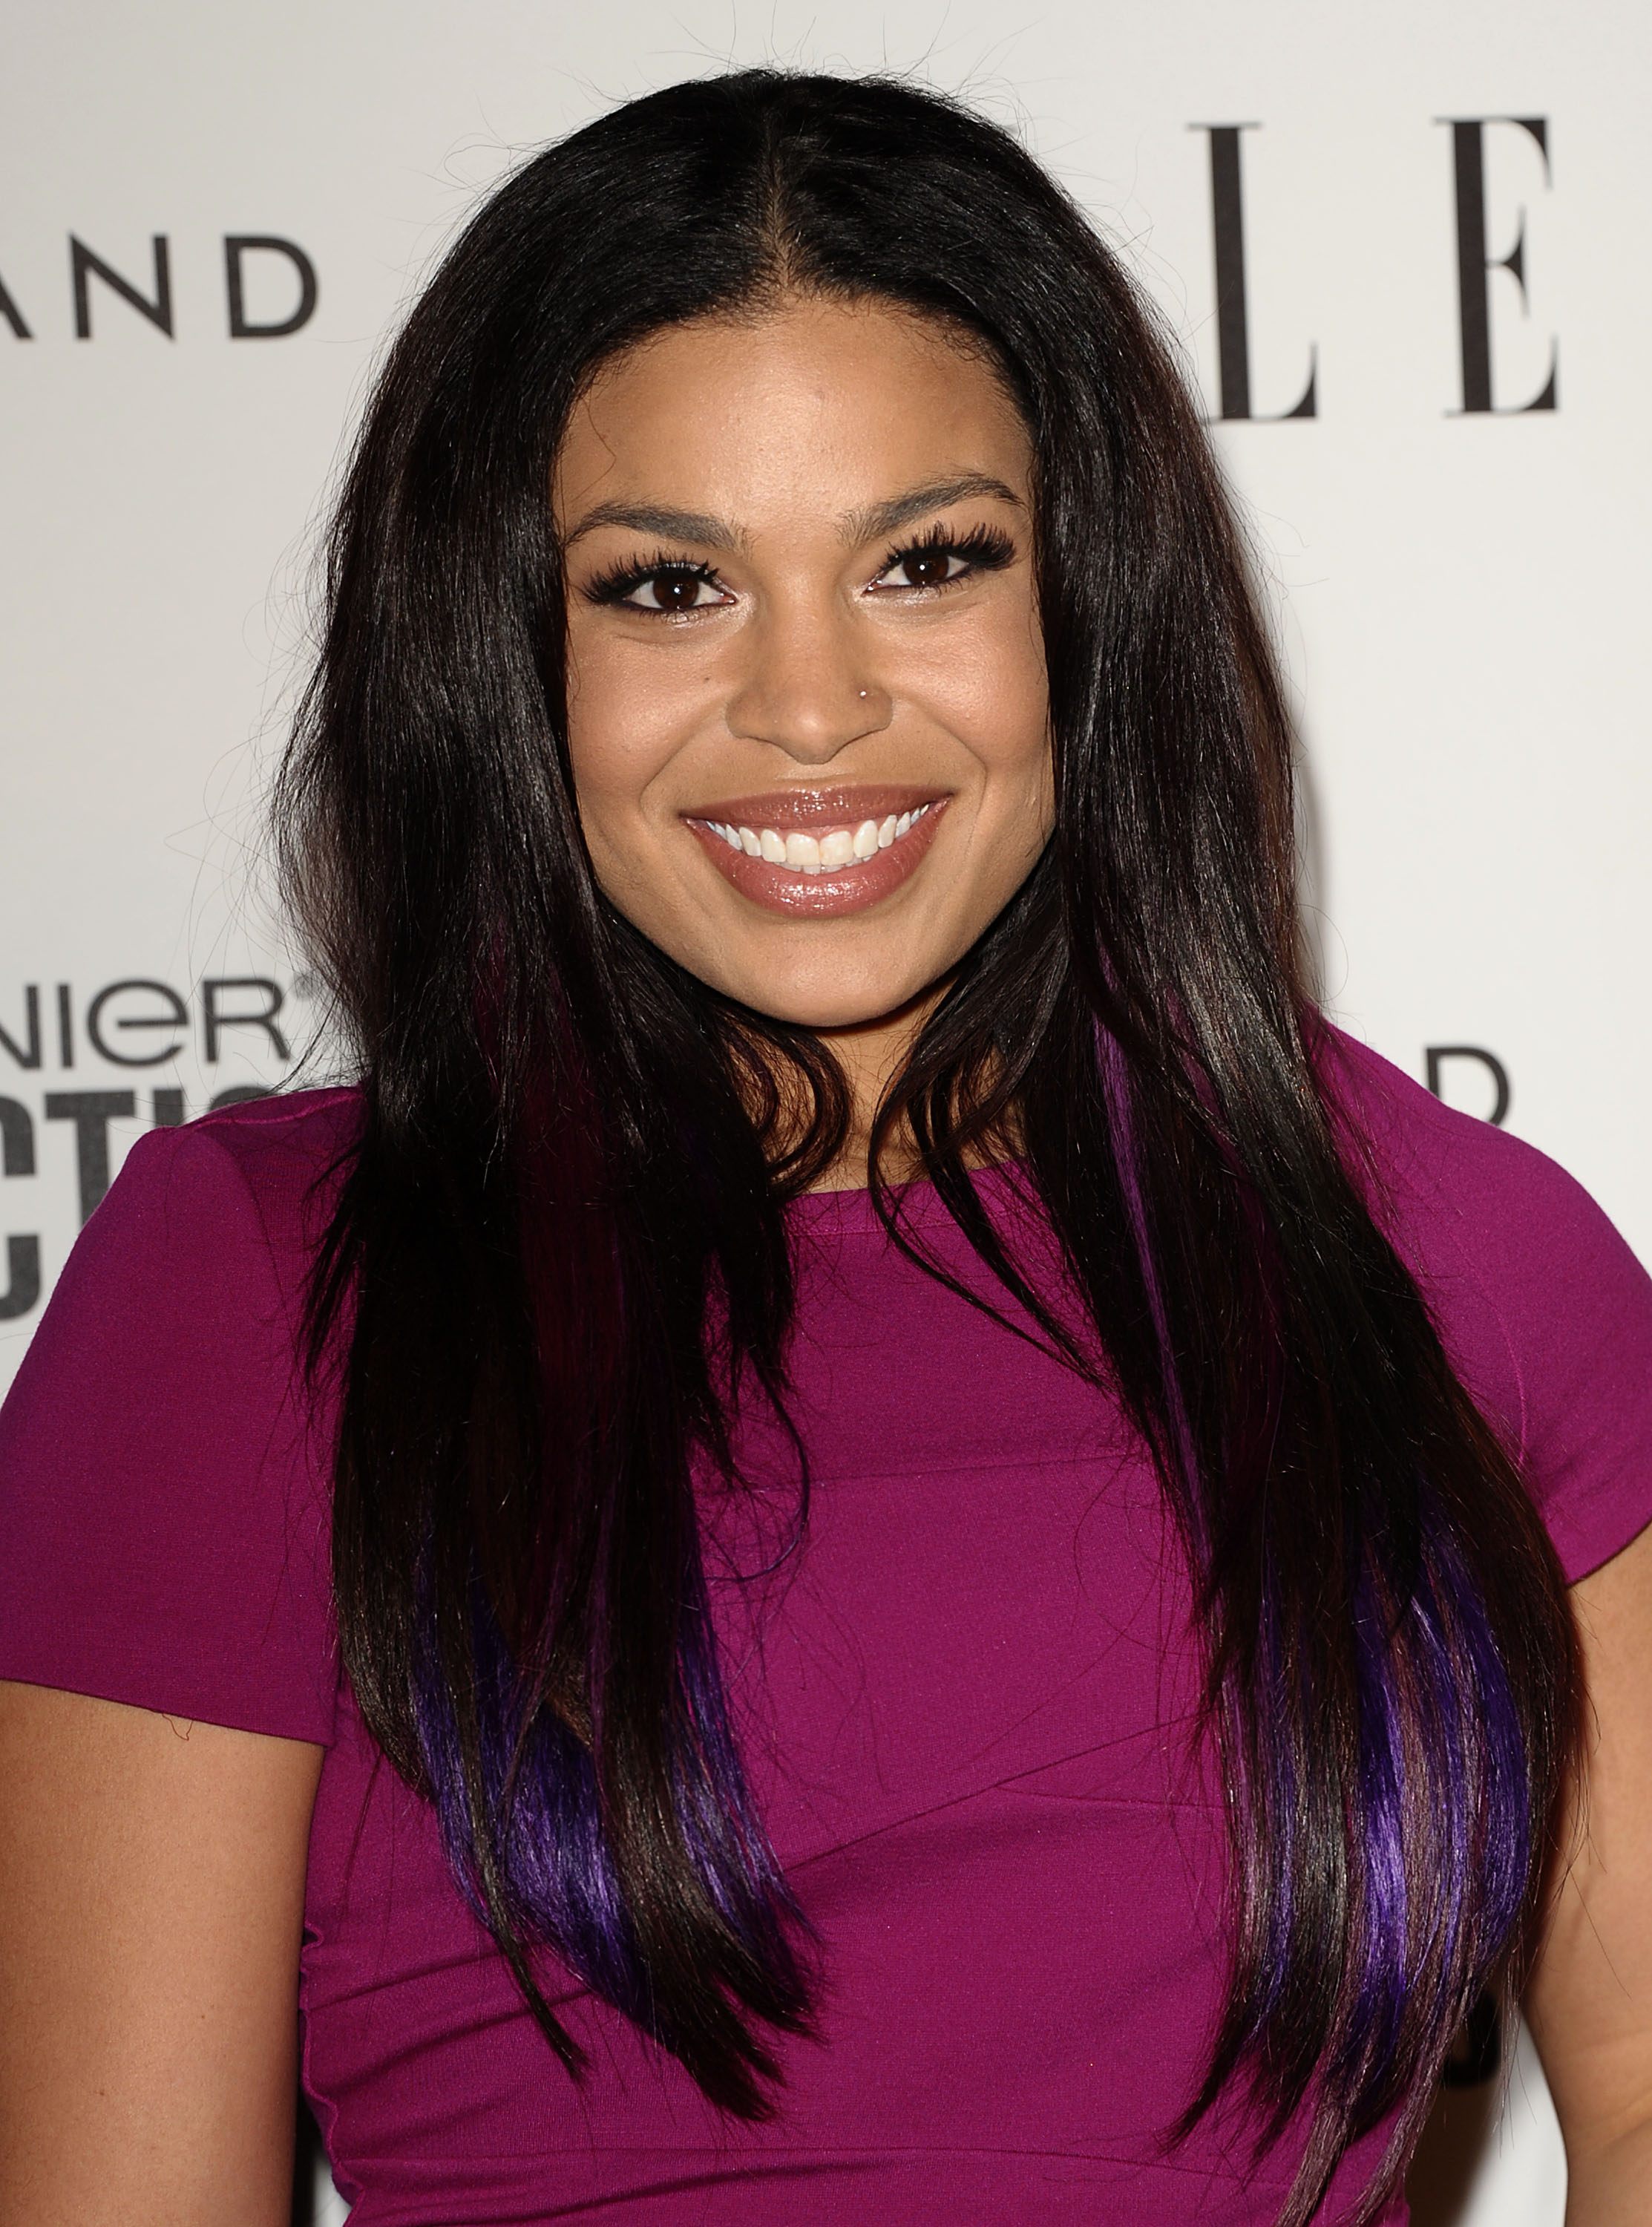 Jordin Sparks photo 42 of 78 pics, wallpaper - photo #417323 - ThePlace2